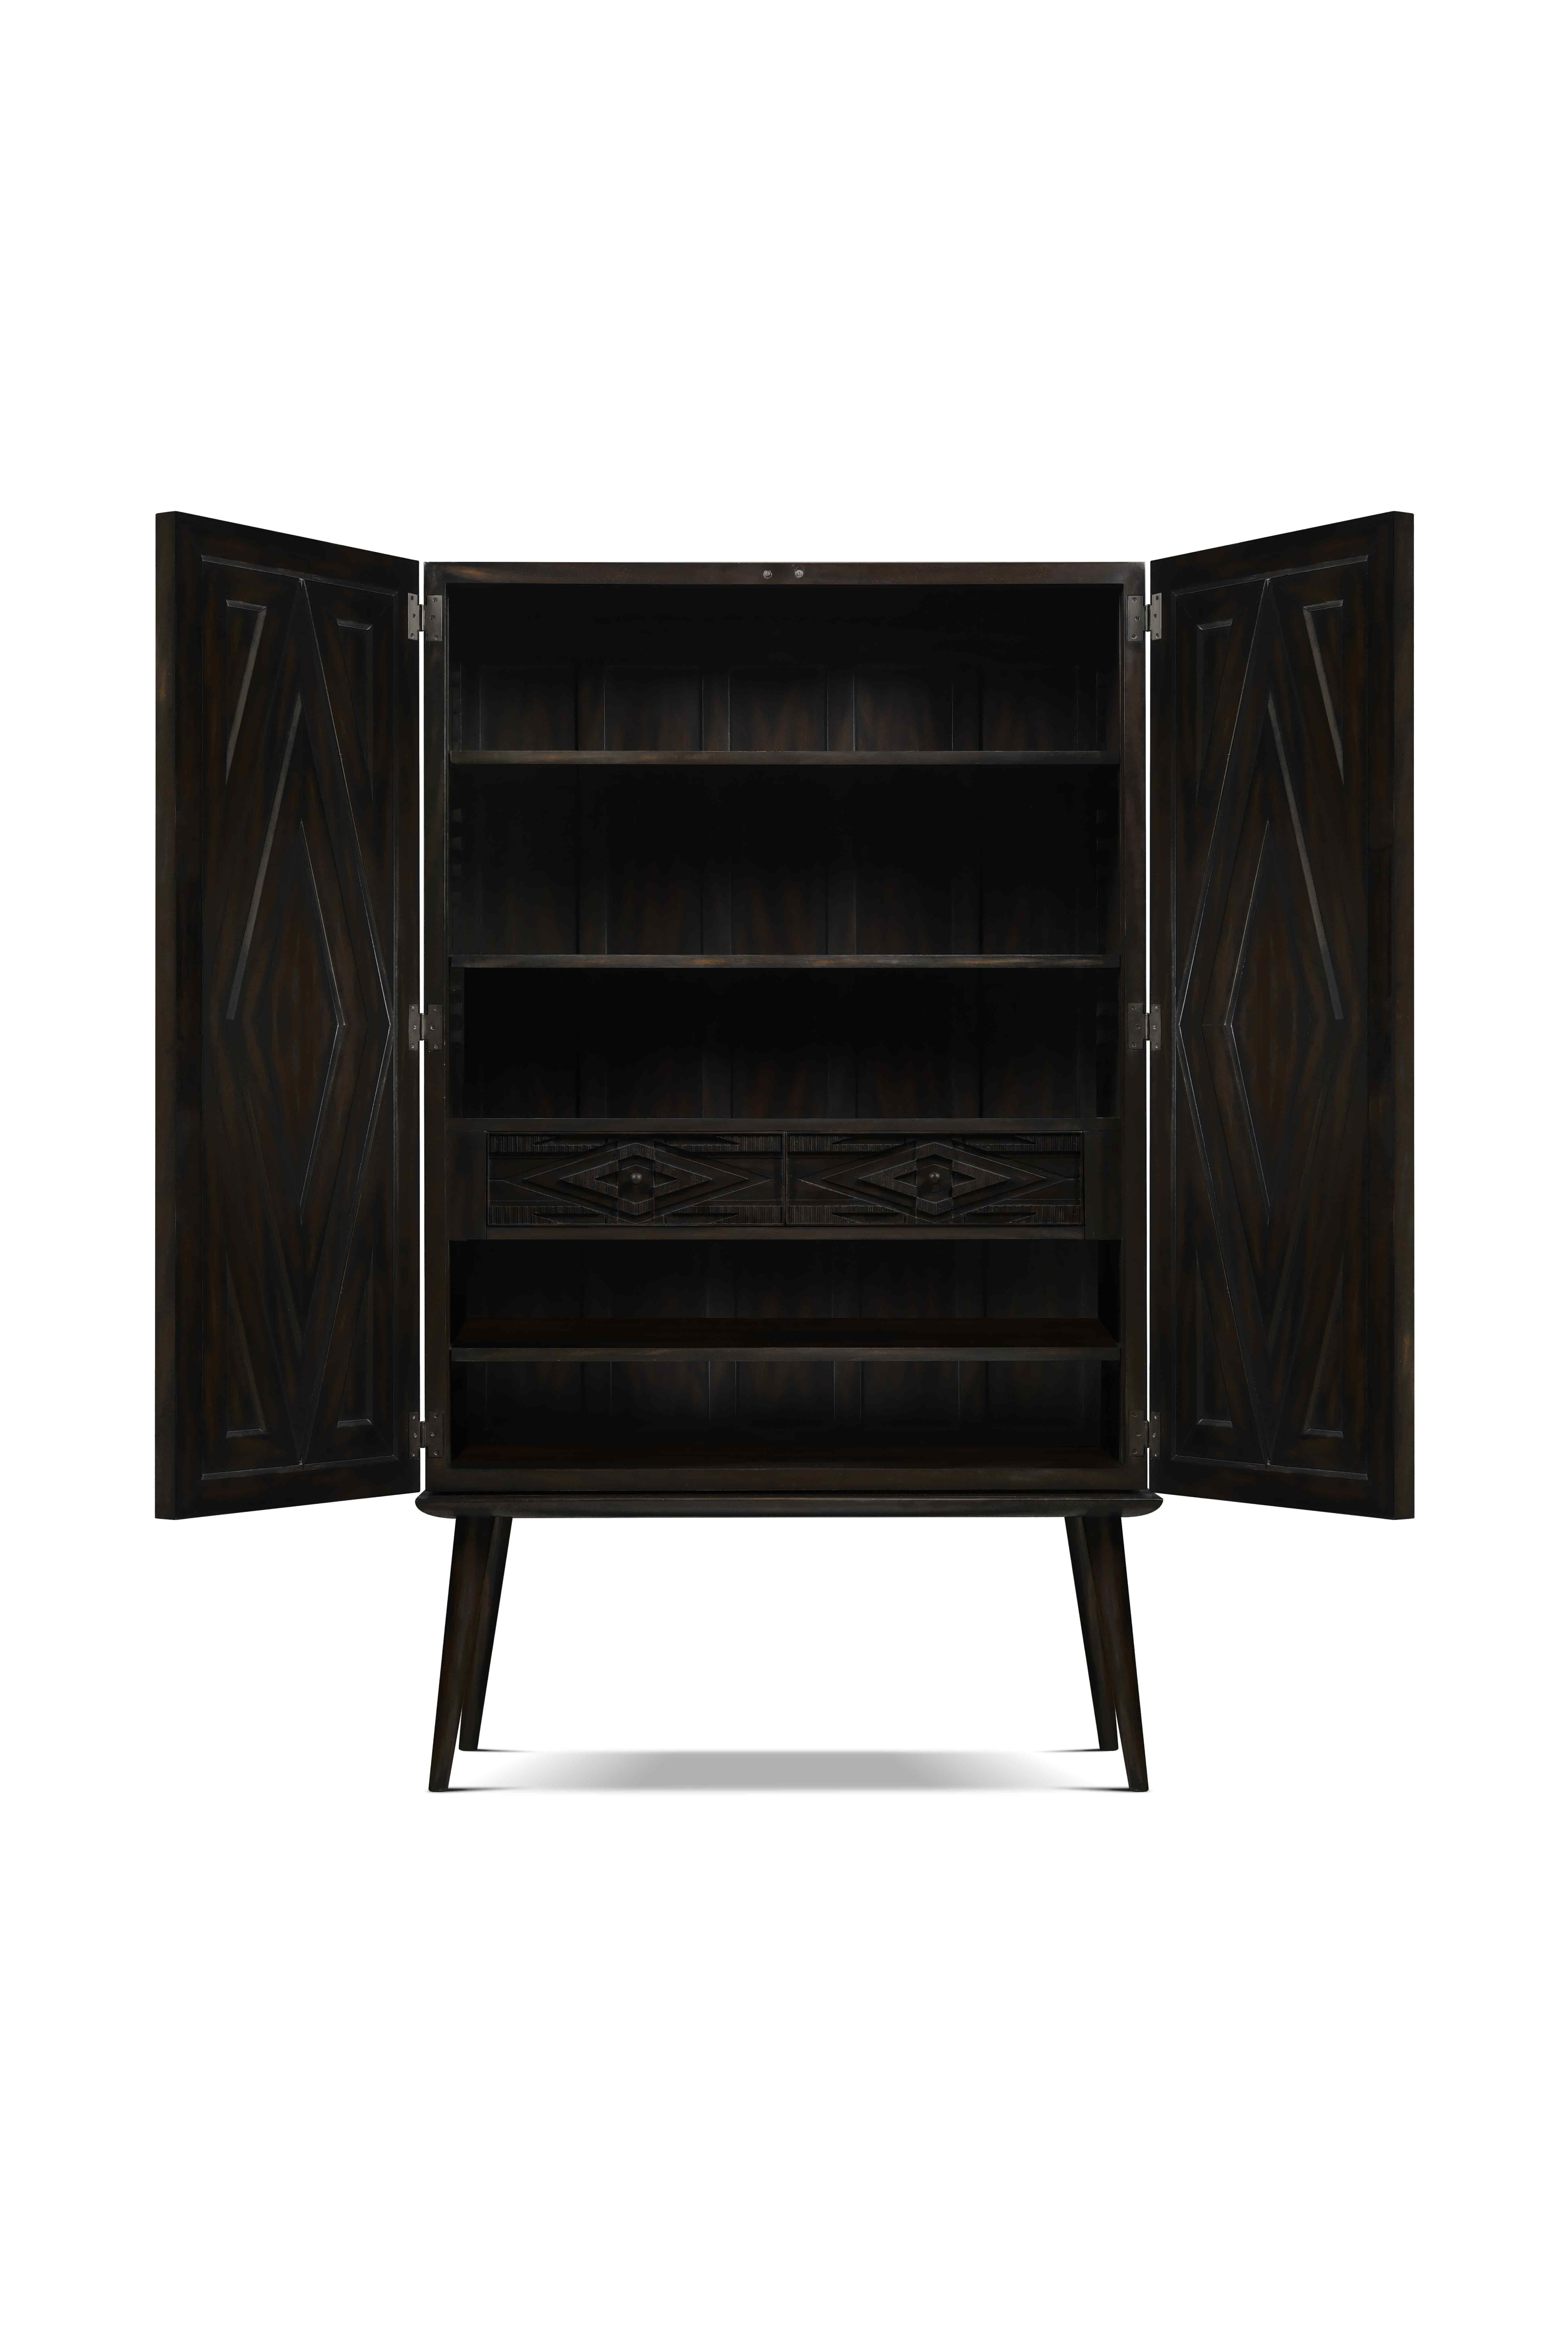 Beautiful decorated Armoire achieved by the use of different moldings in different planes creating a complex geometric design. It has a simple base with hand turned legs that give it balance, combining simplicity and texture.